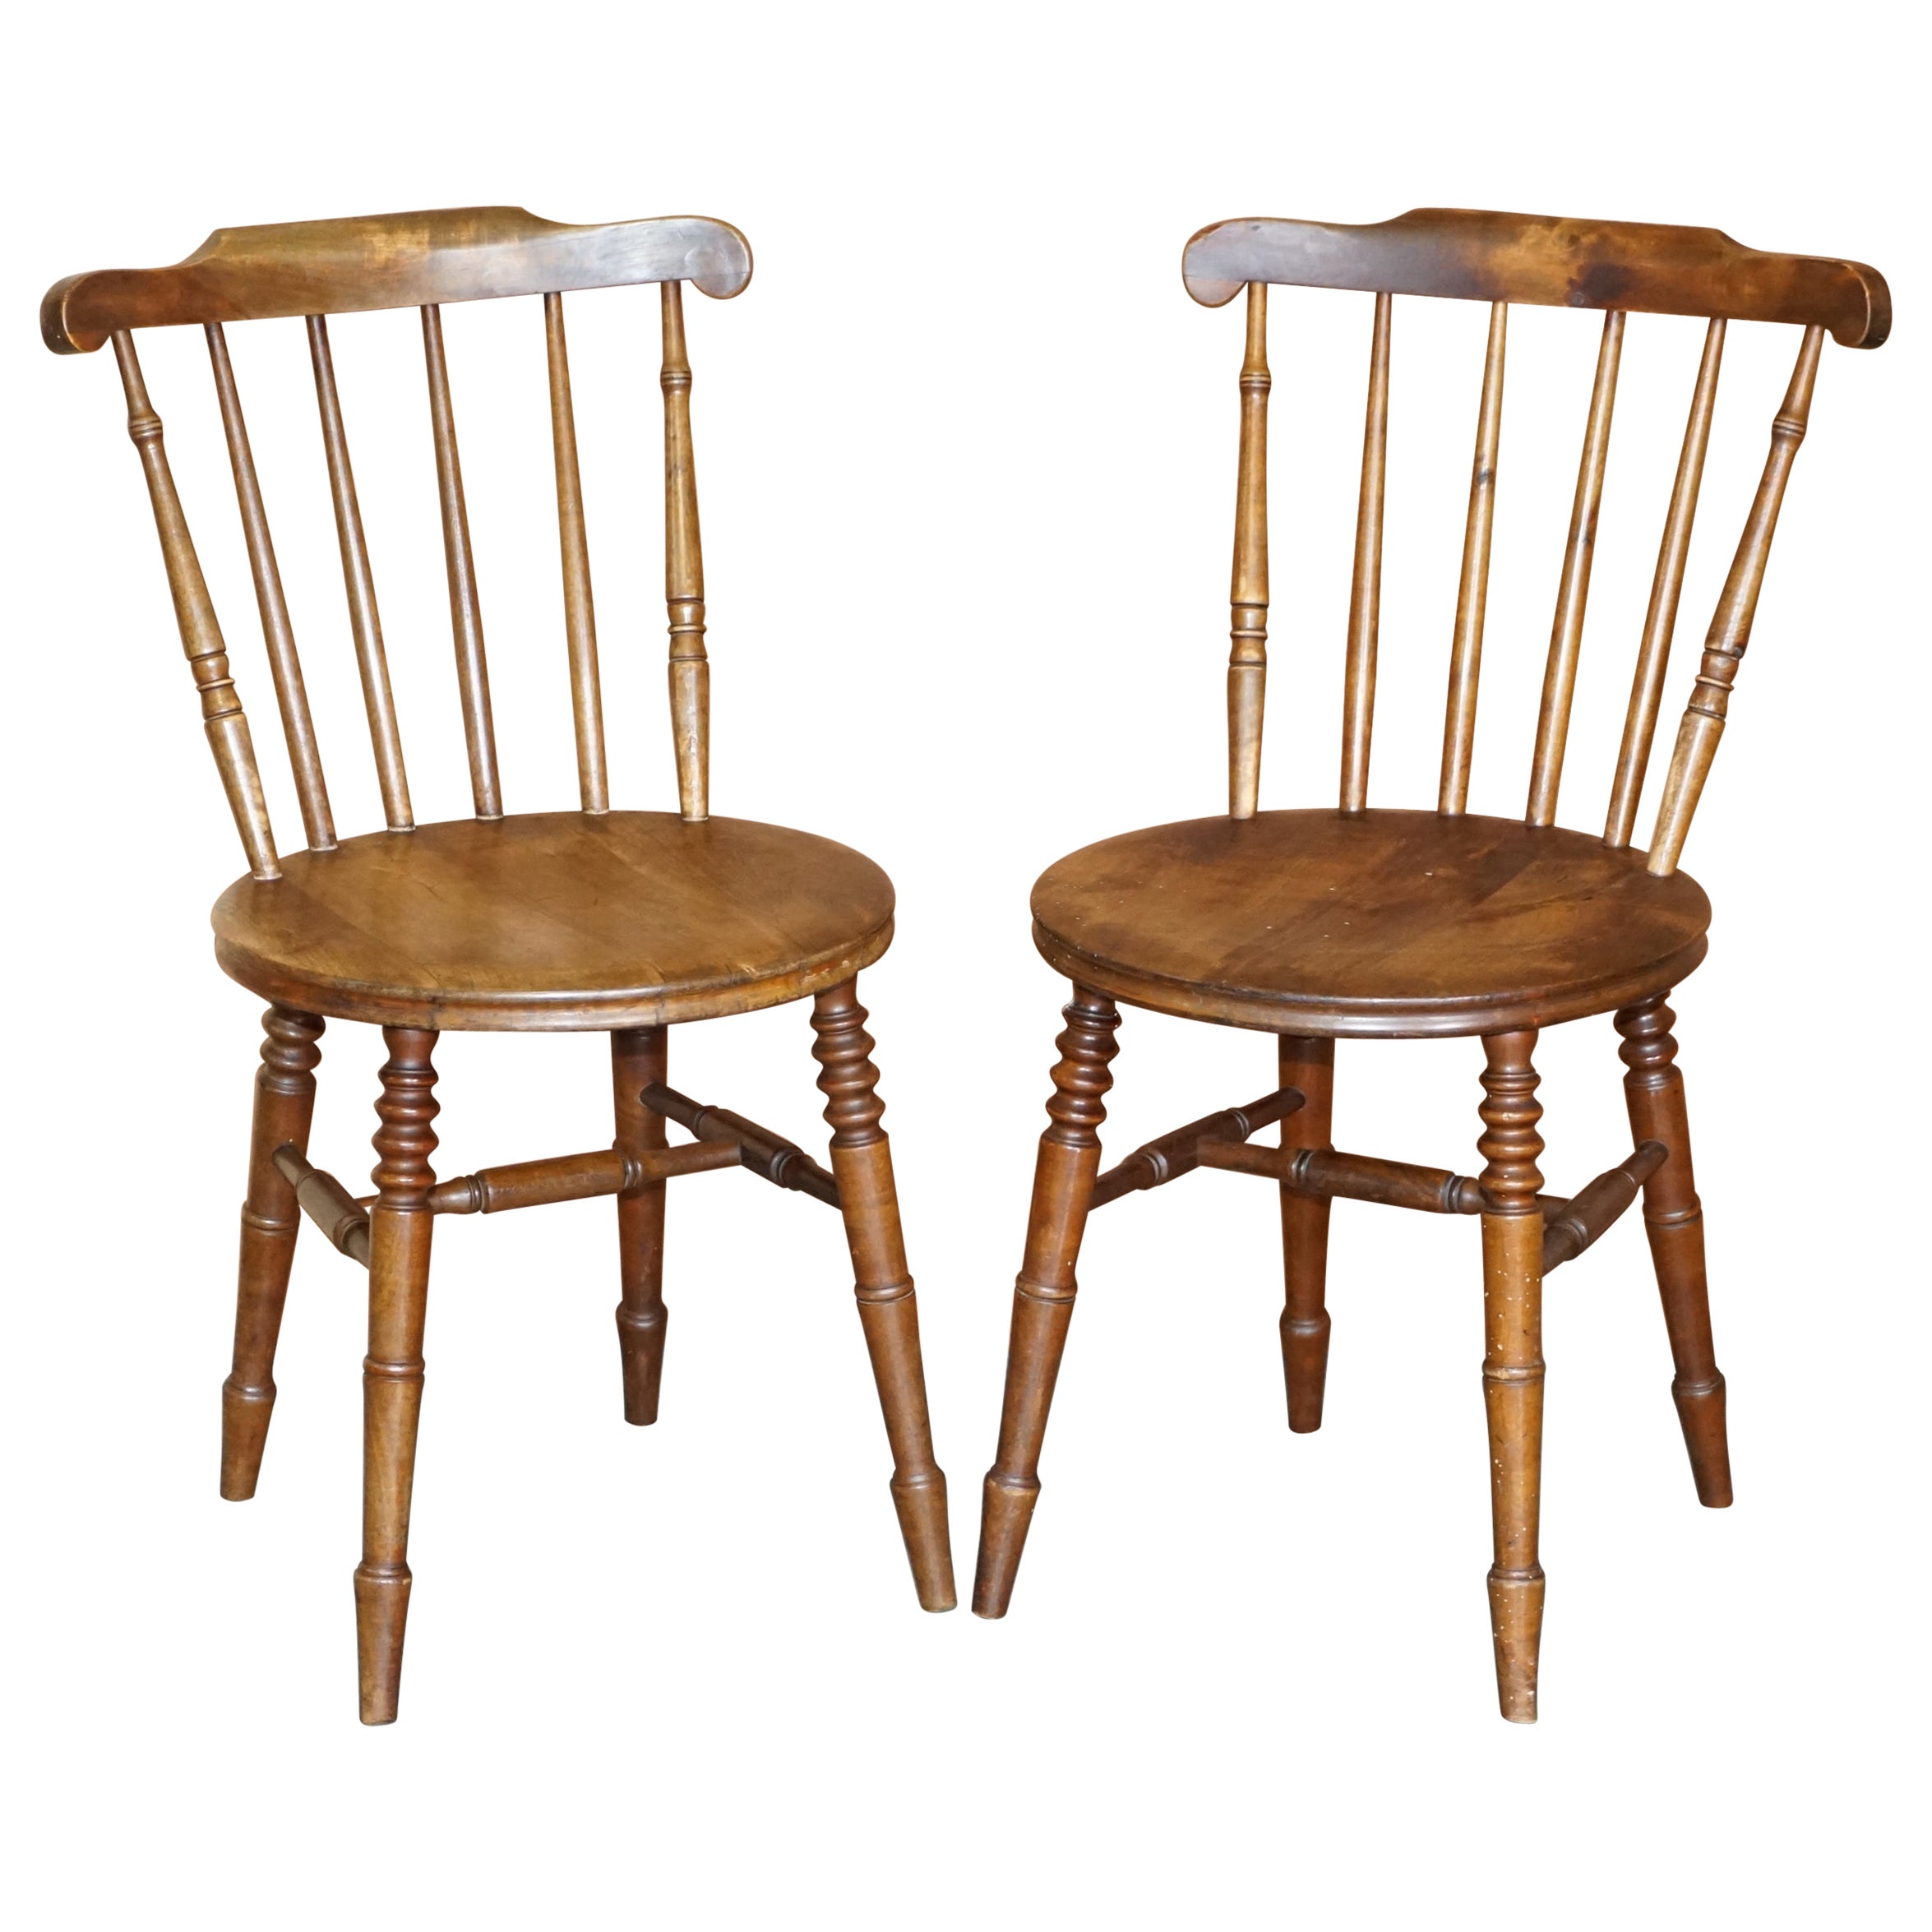 Antique Pair of Edwardian Walnut Fully Stamped Swedish Ibex Penny Windsor Chairs